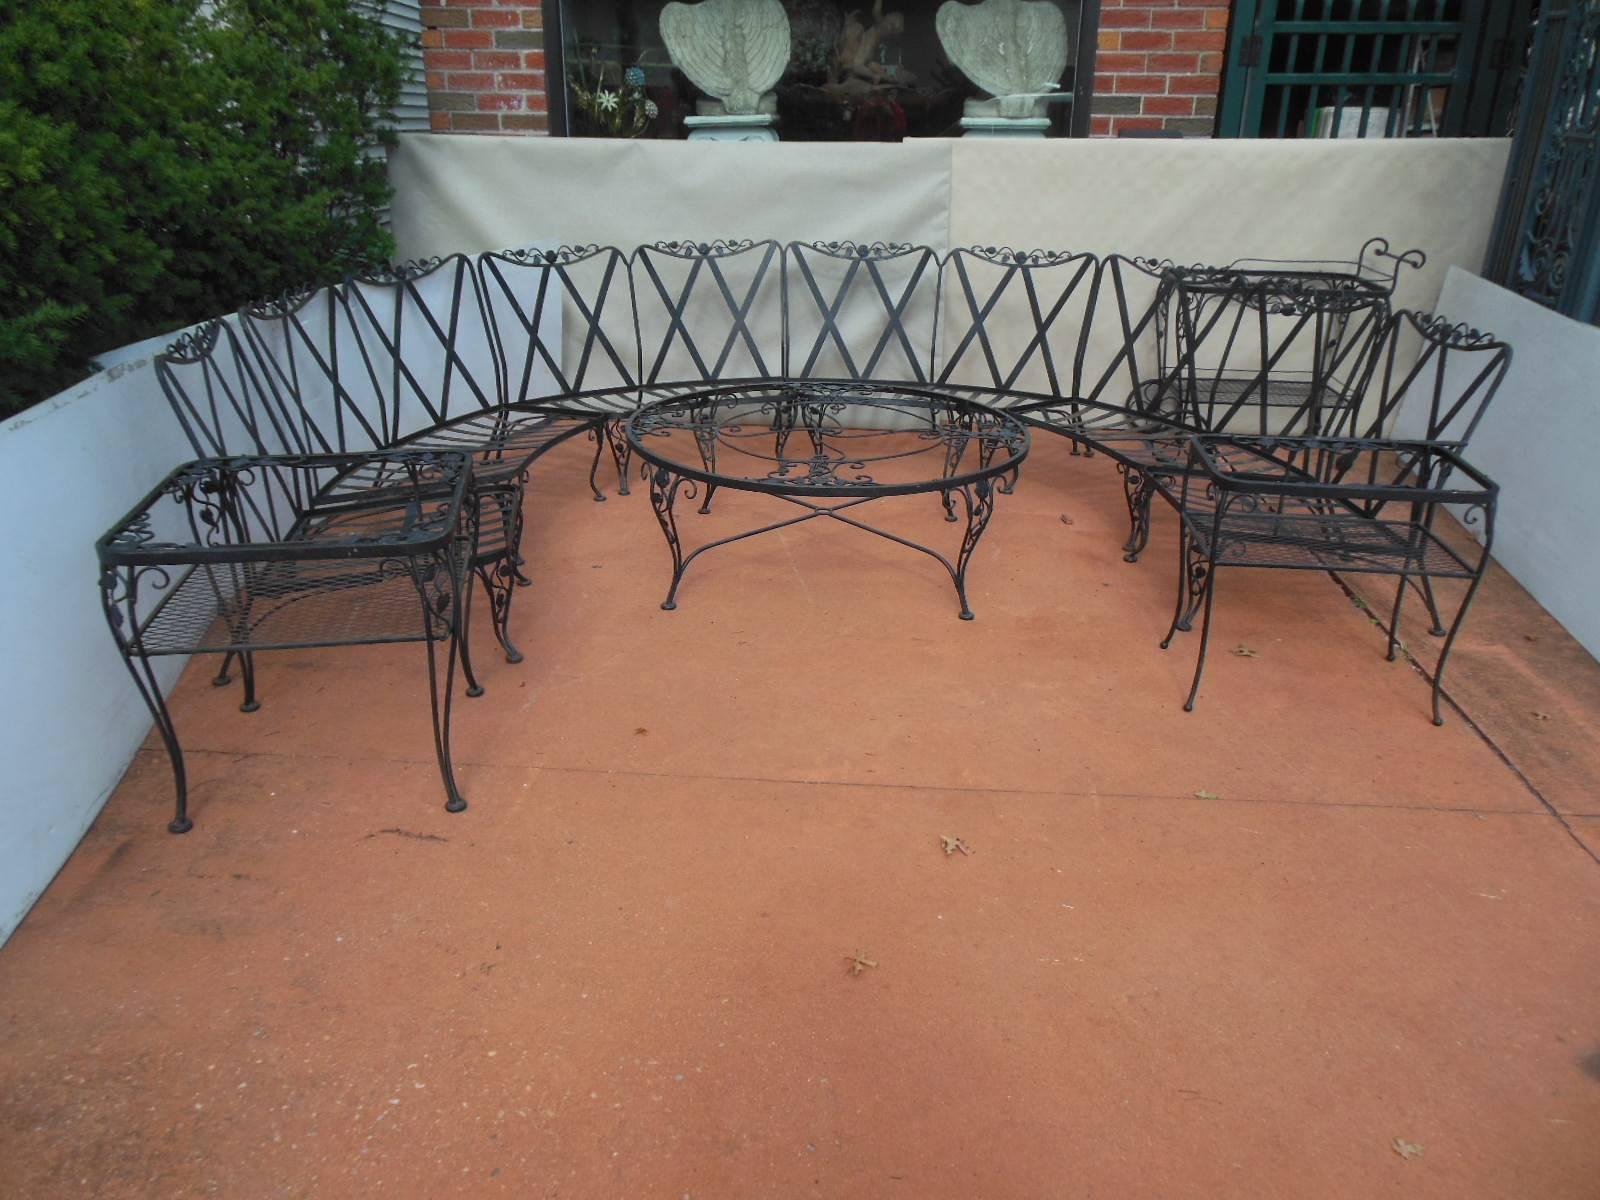 This is an extensive garden patio set by Woodard in the most desirable Chantilly Rose Pattern. The wrought iron set was made in the mid 20th century.
The large set consists of 6 seating pieces of which 4 are curved half moon shaped loveseats & 2